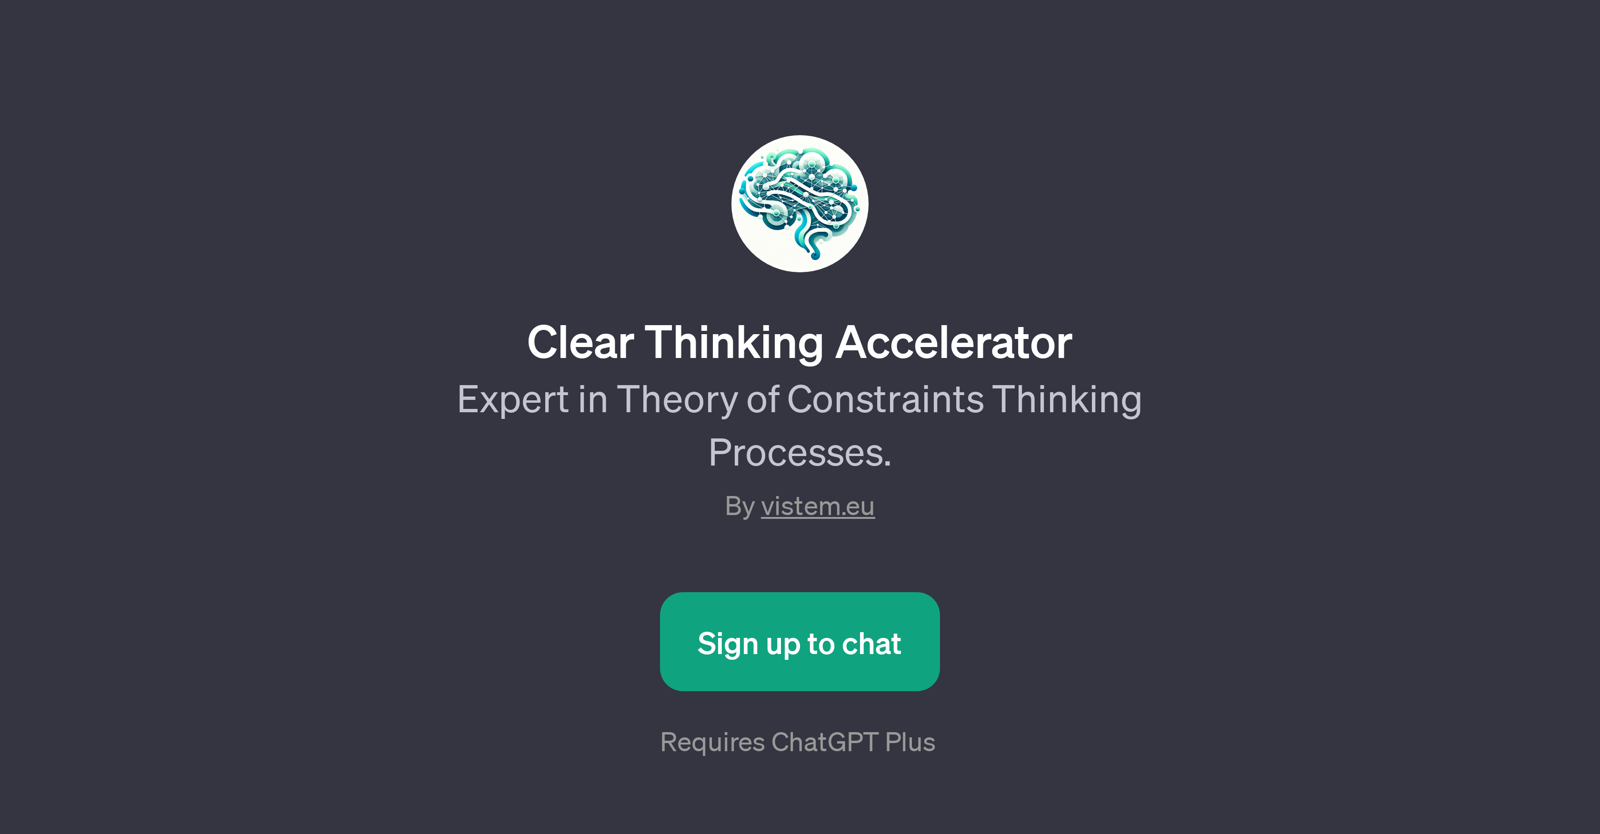 Clear Thinking Accelerator website